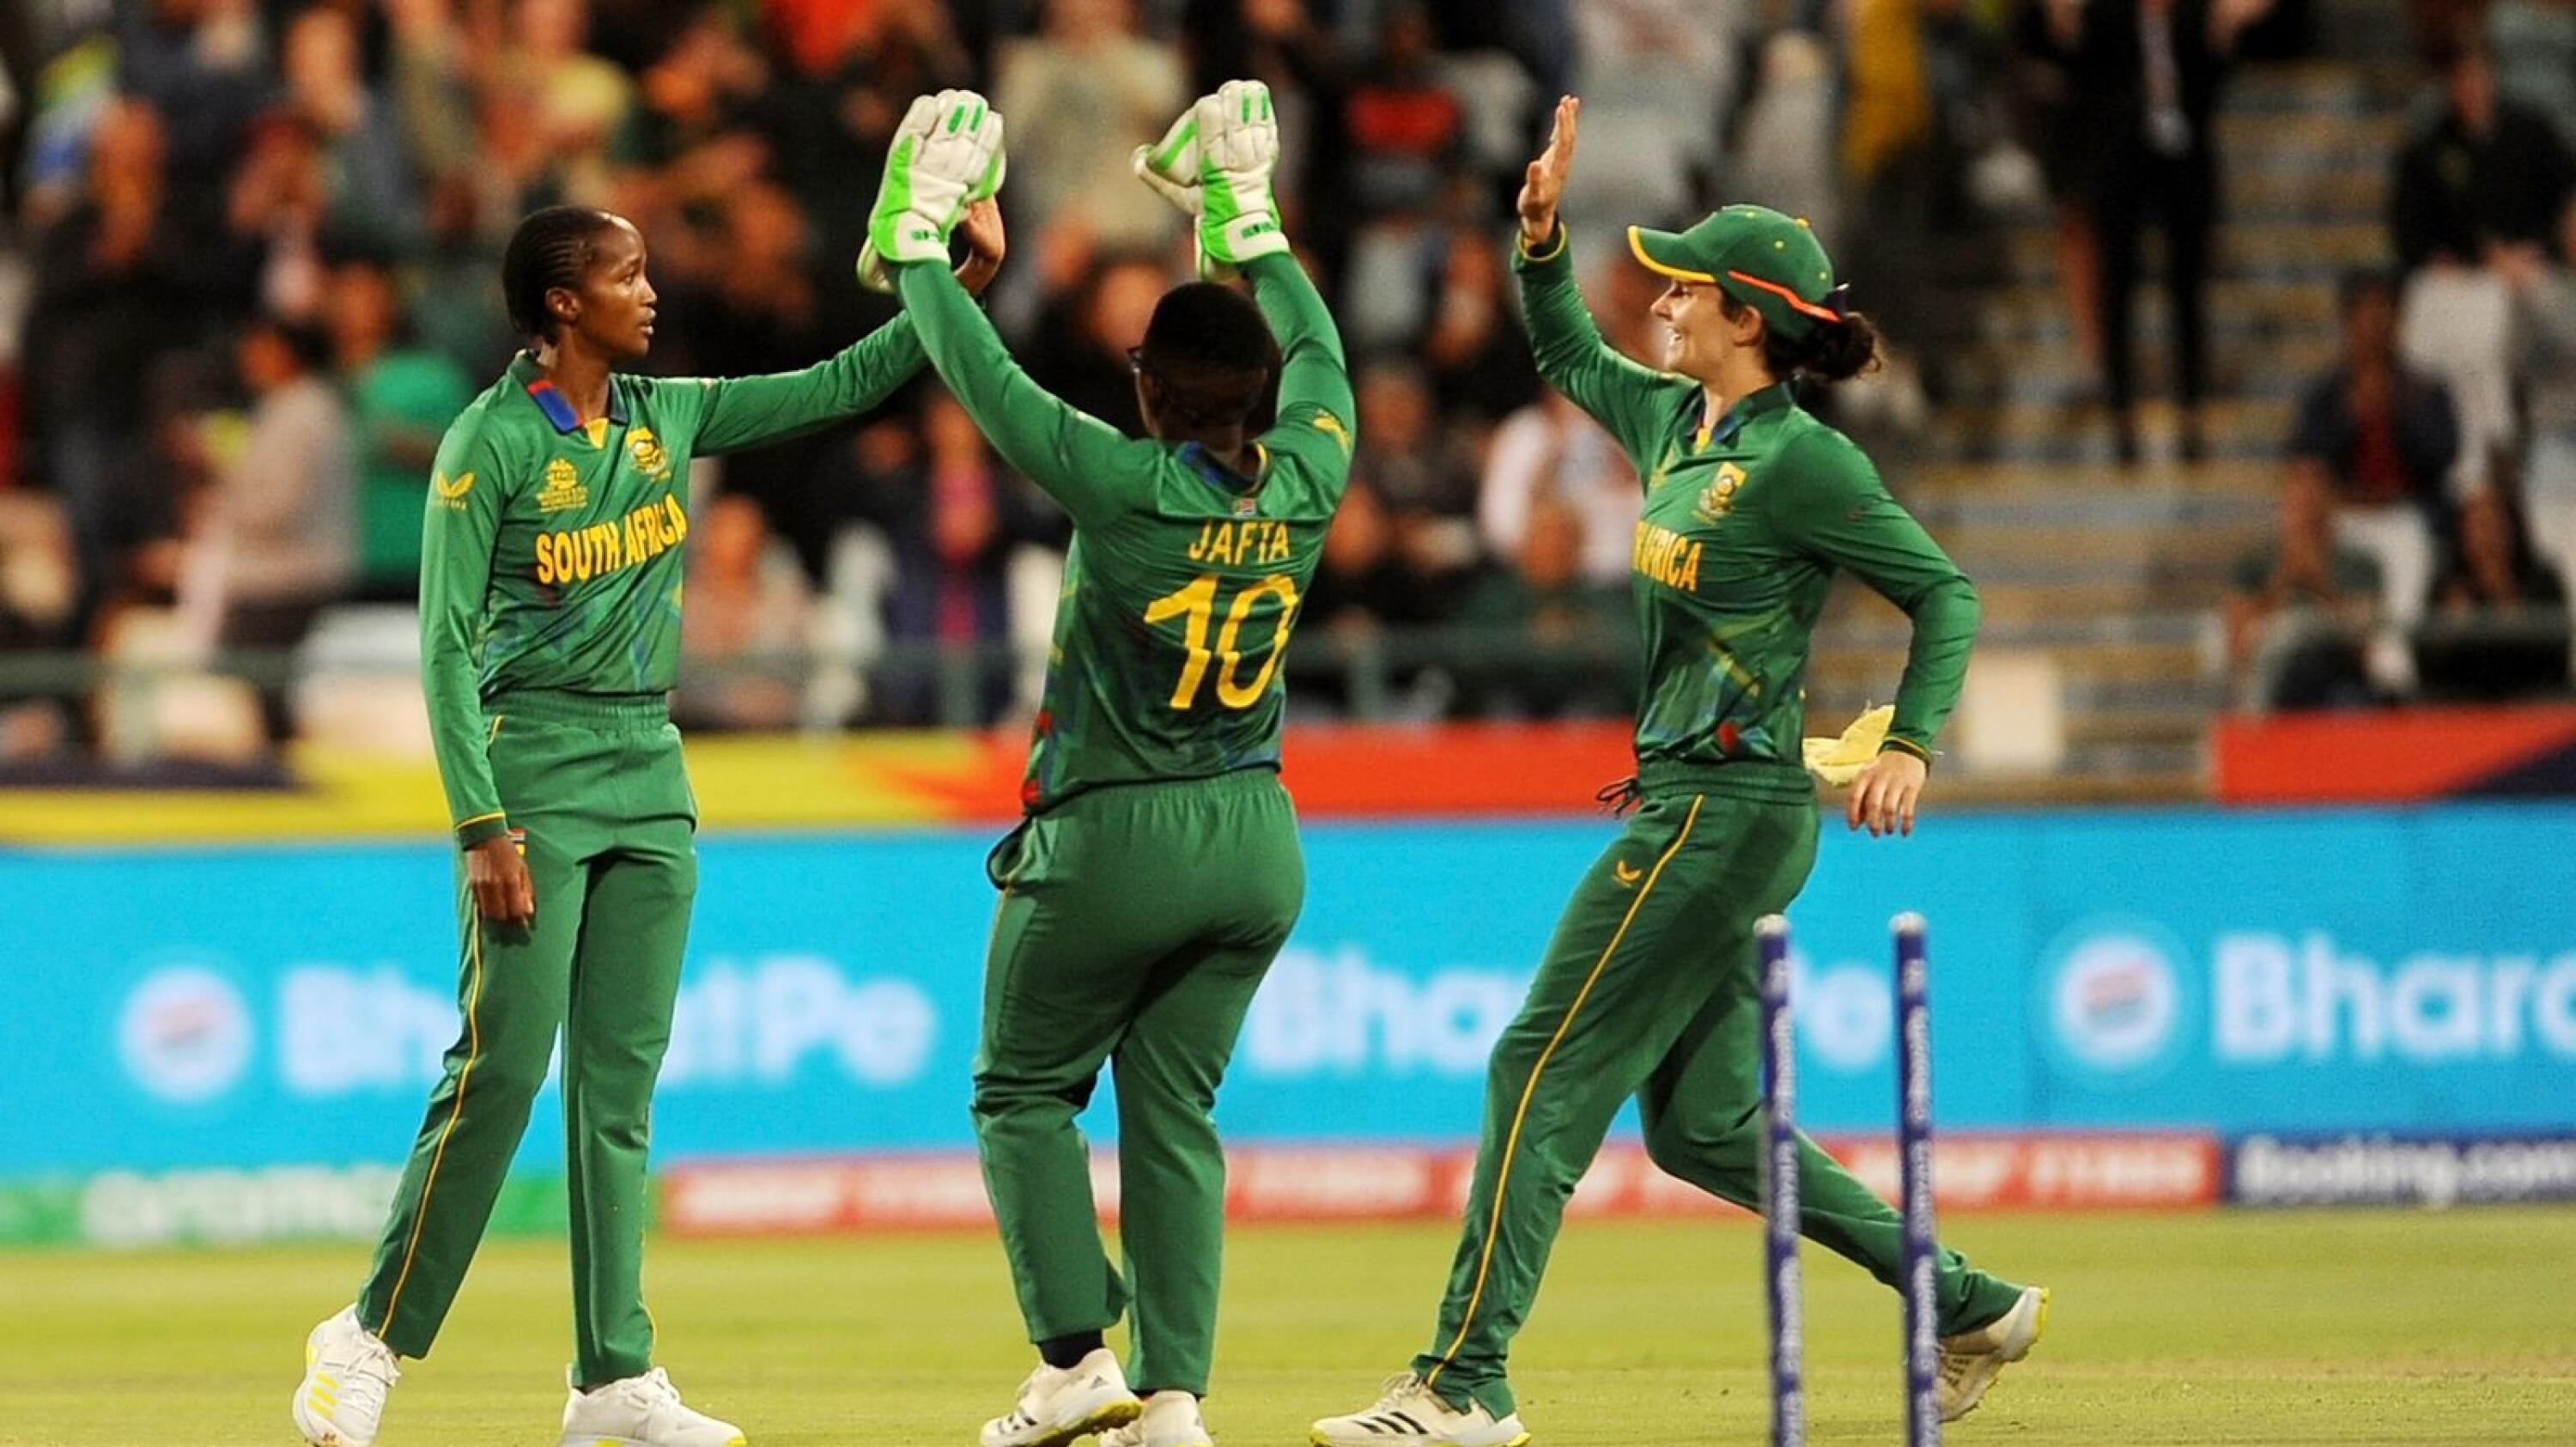 Ayabonga Khaka (left) of South Africa  celebrates with teammates Sinalo Jafta (centre) and Laura Wolvaardt during their ICC T20 Women's World Cup match against Bangladesghat the Newlands cricket stadium